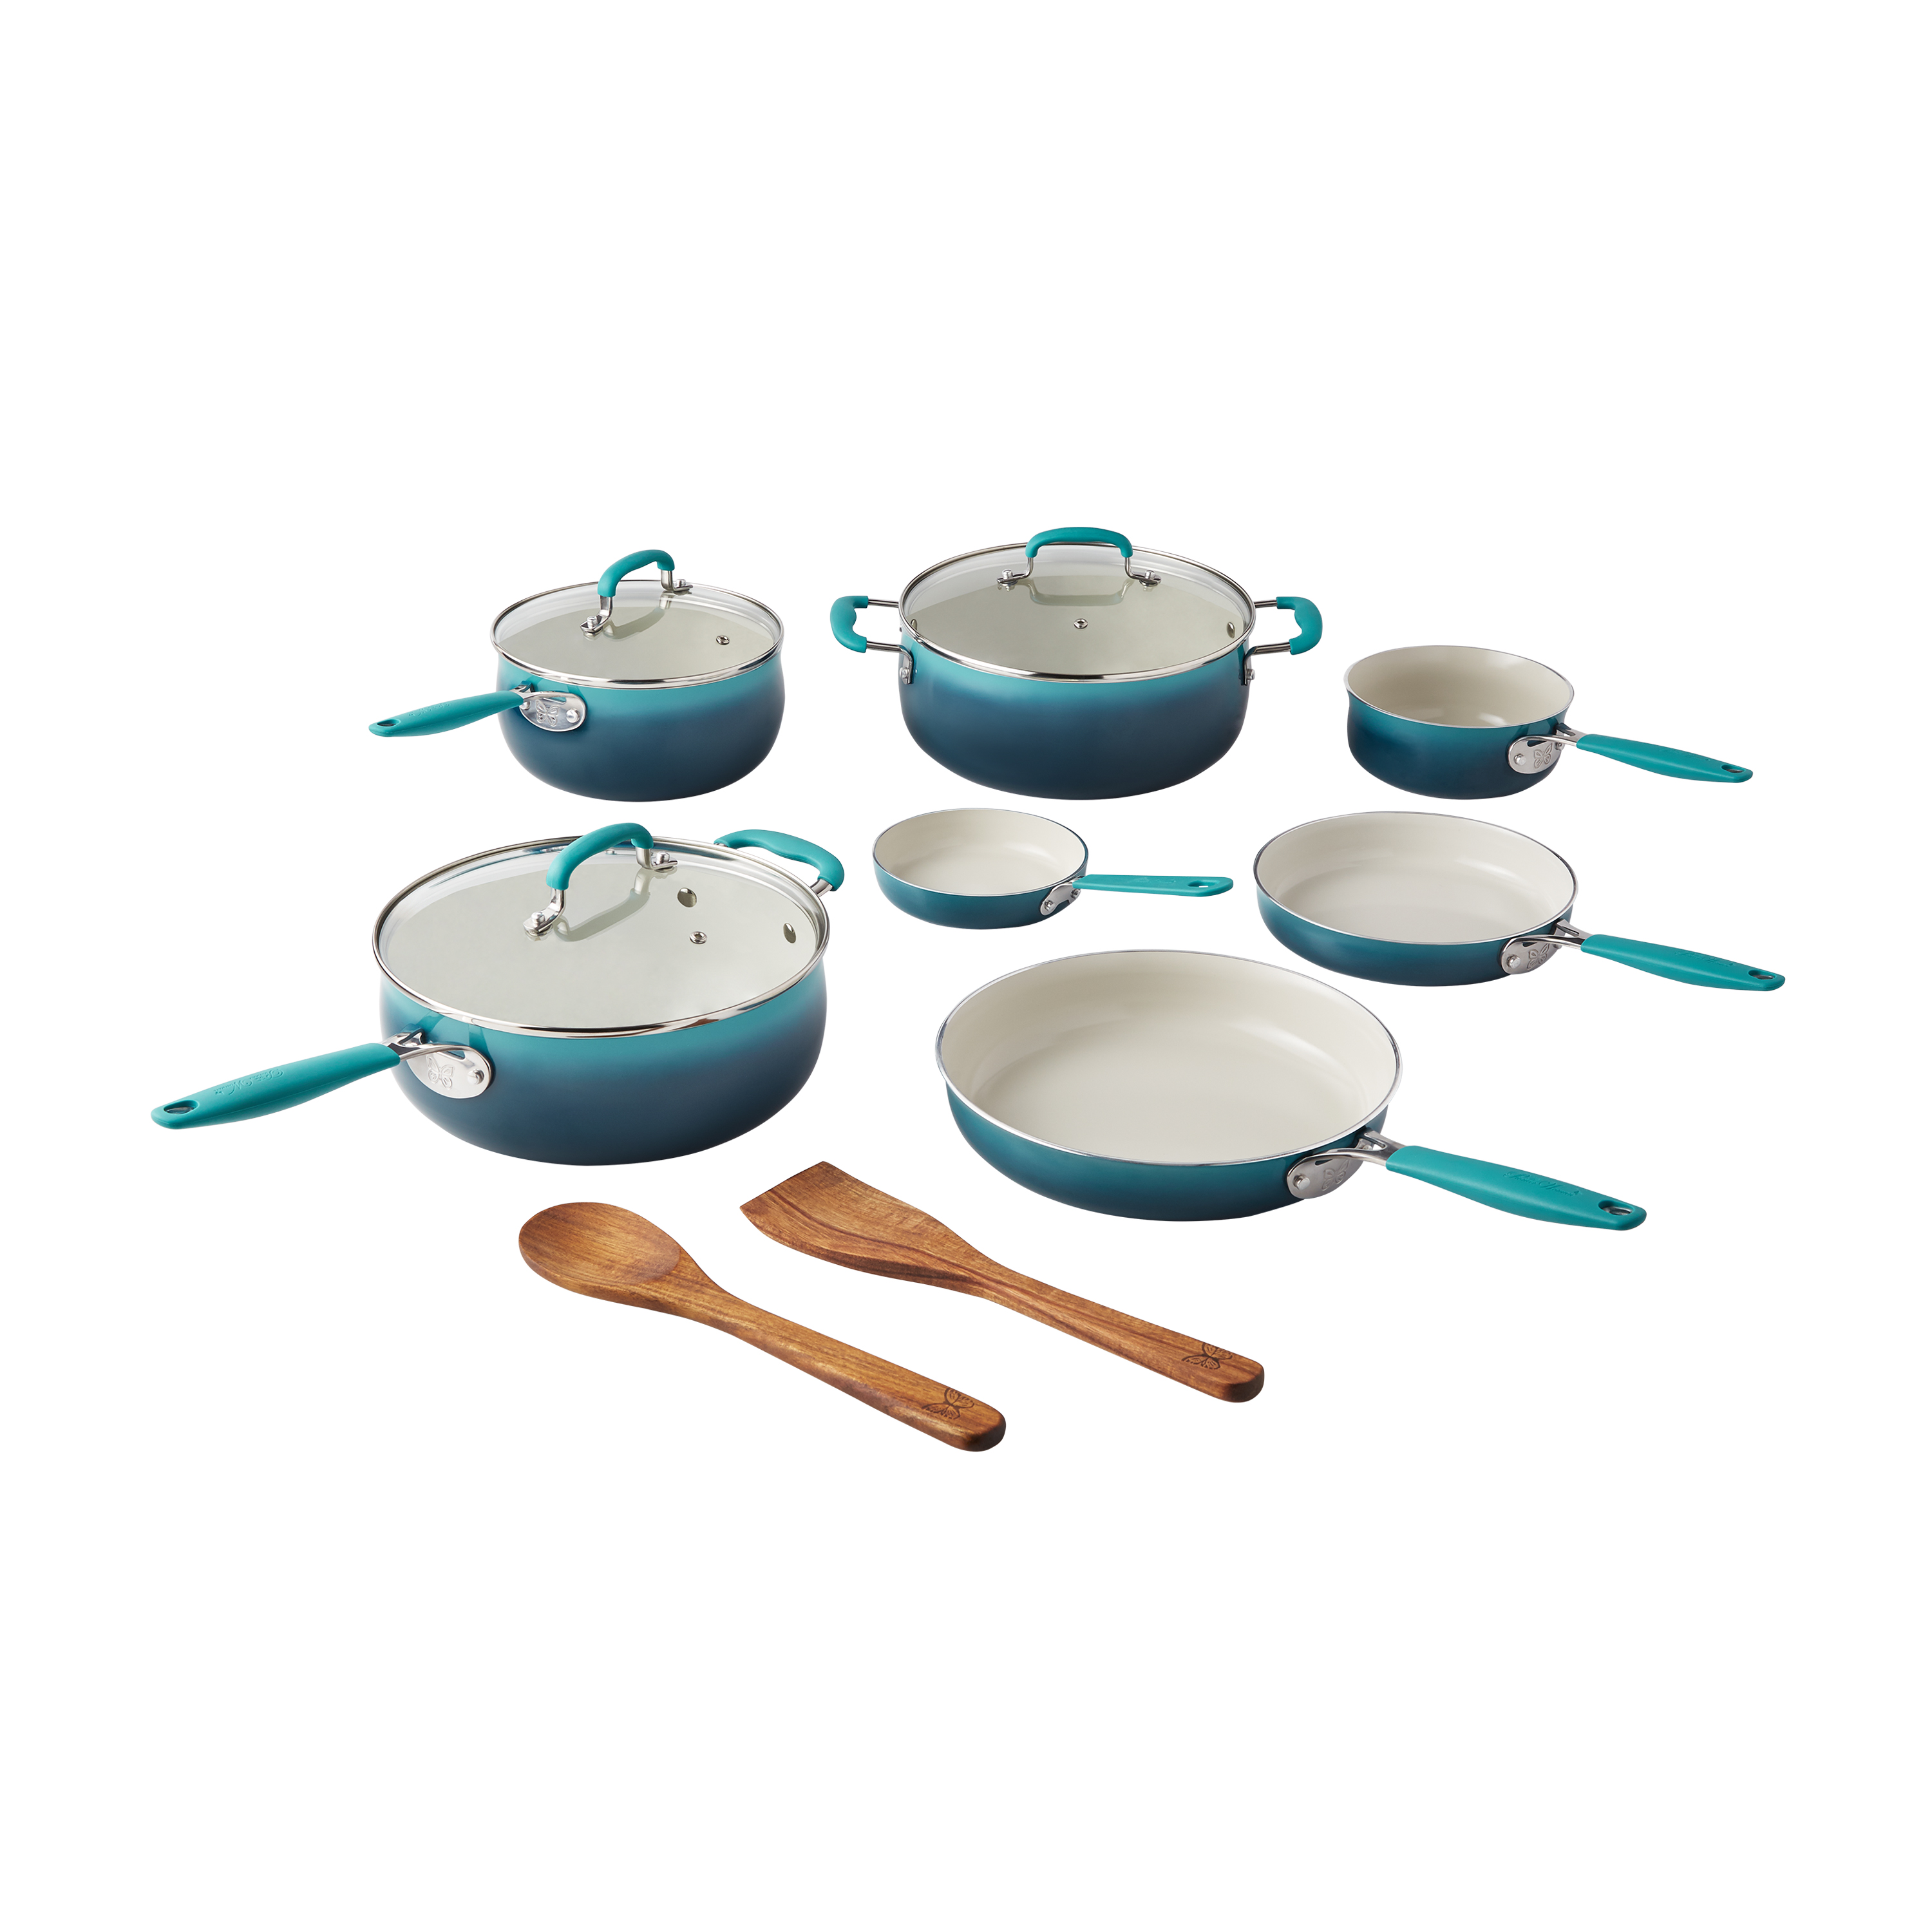 The Pioneer Woman 12-Piece Classic Belly Ceramic Cookware Set, Porcelain Enamel, Ombre Teal - image 11 of 11